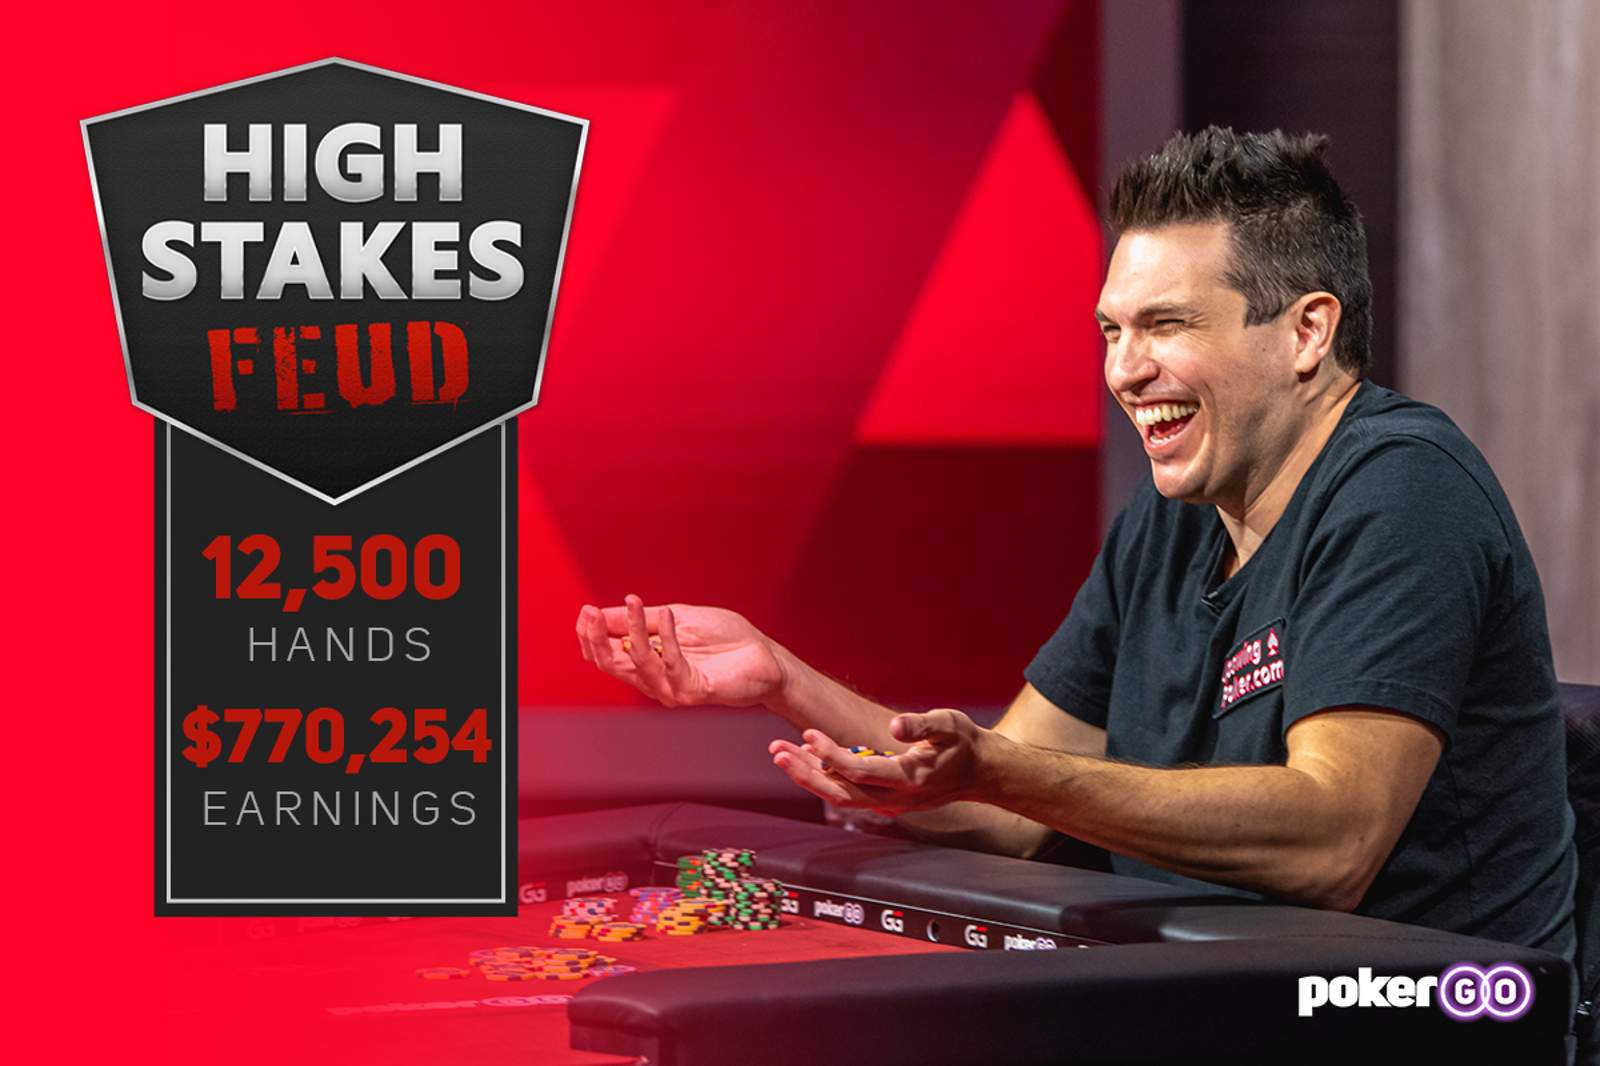 Doug Polk Leads Daniel Negreanu by $770,254 After 12,500 Hands in High Stakes Feud